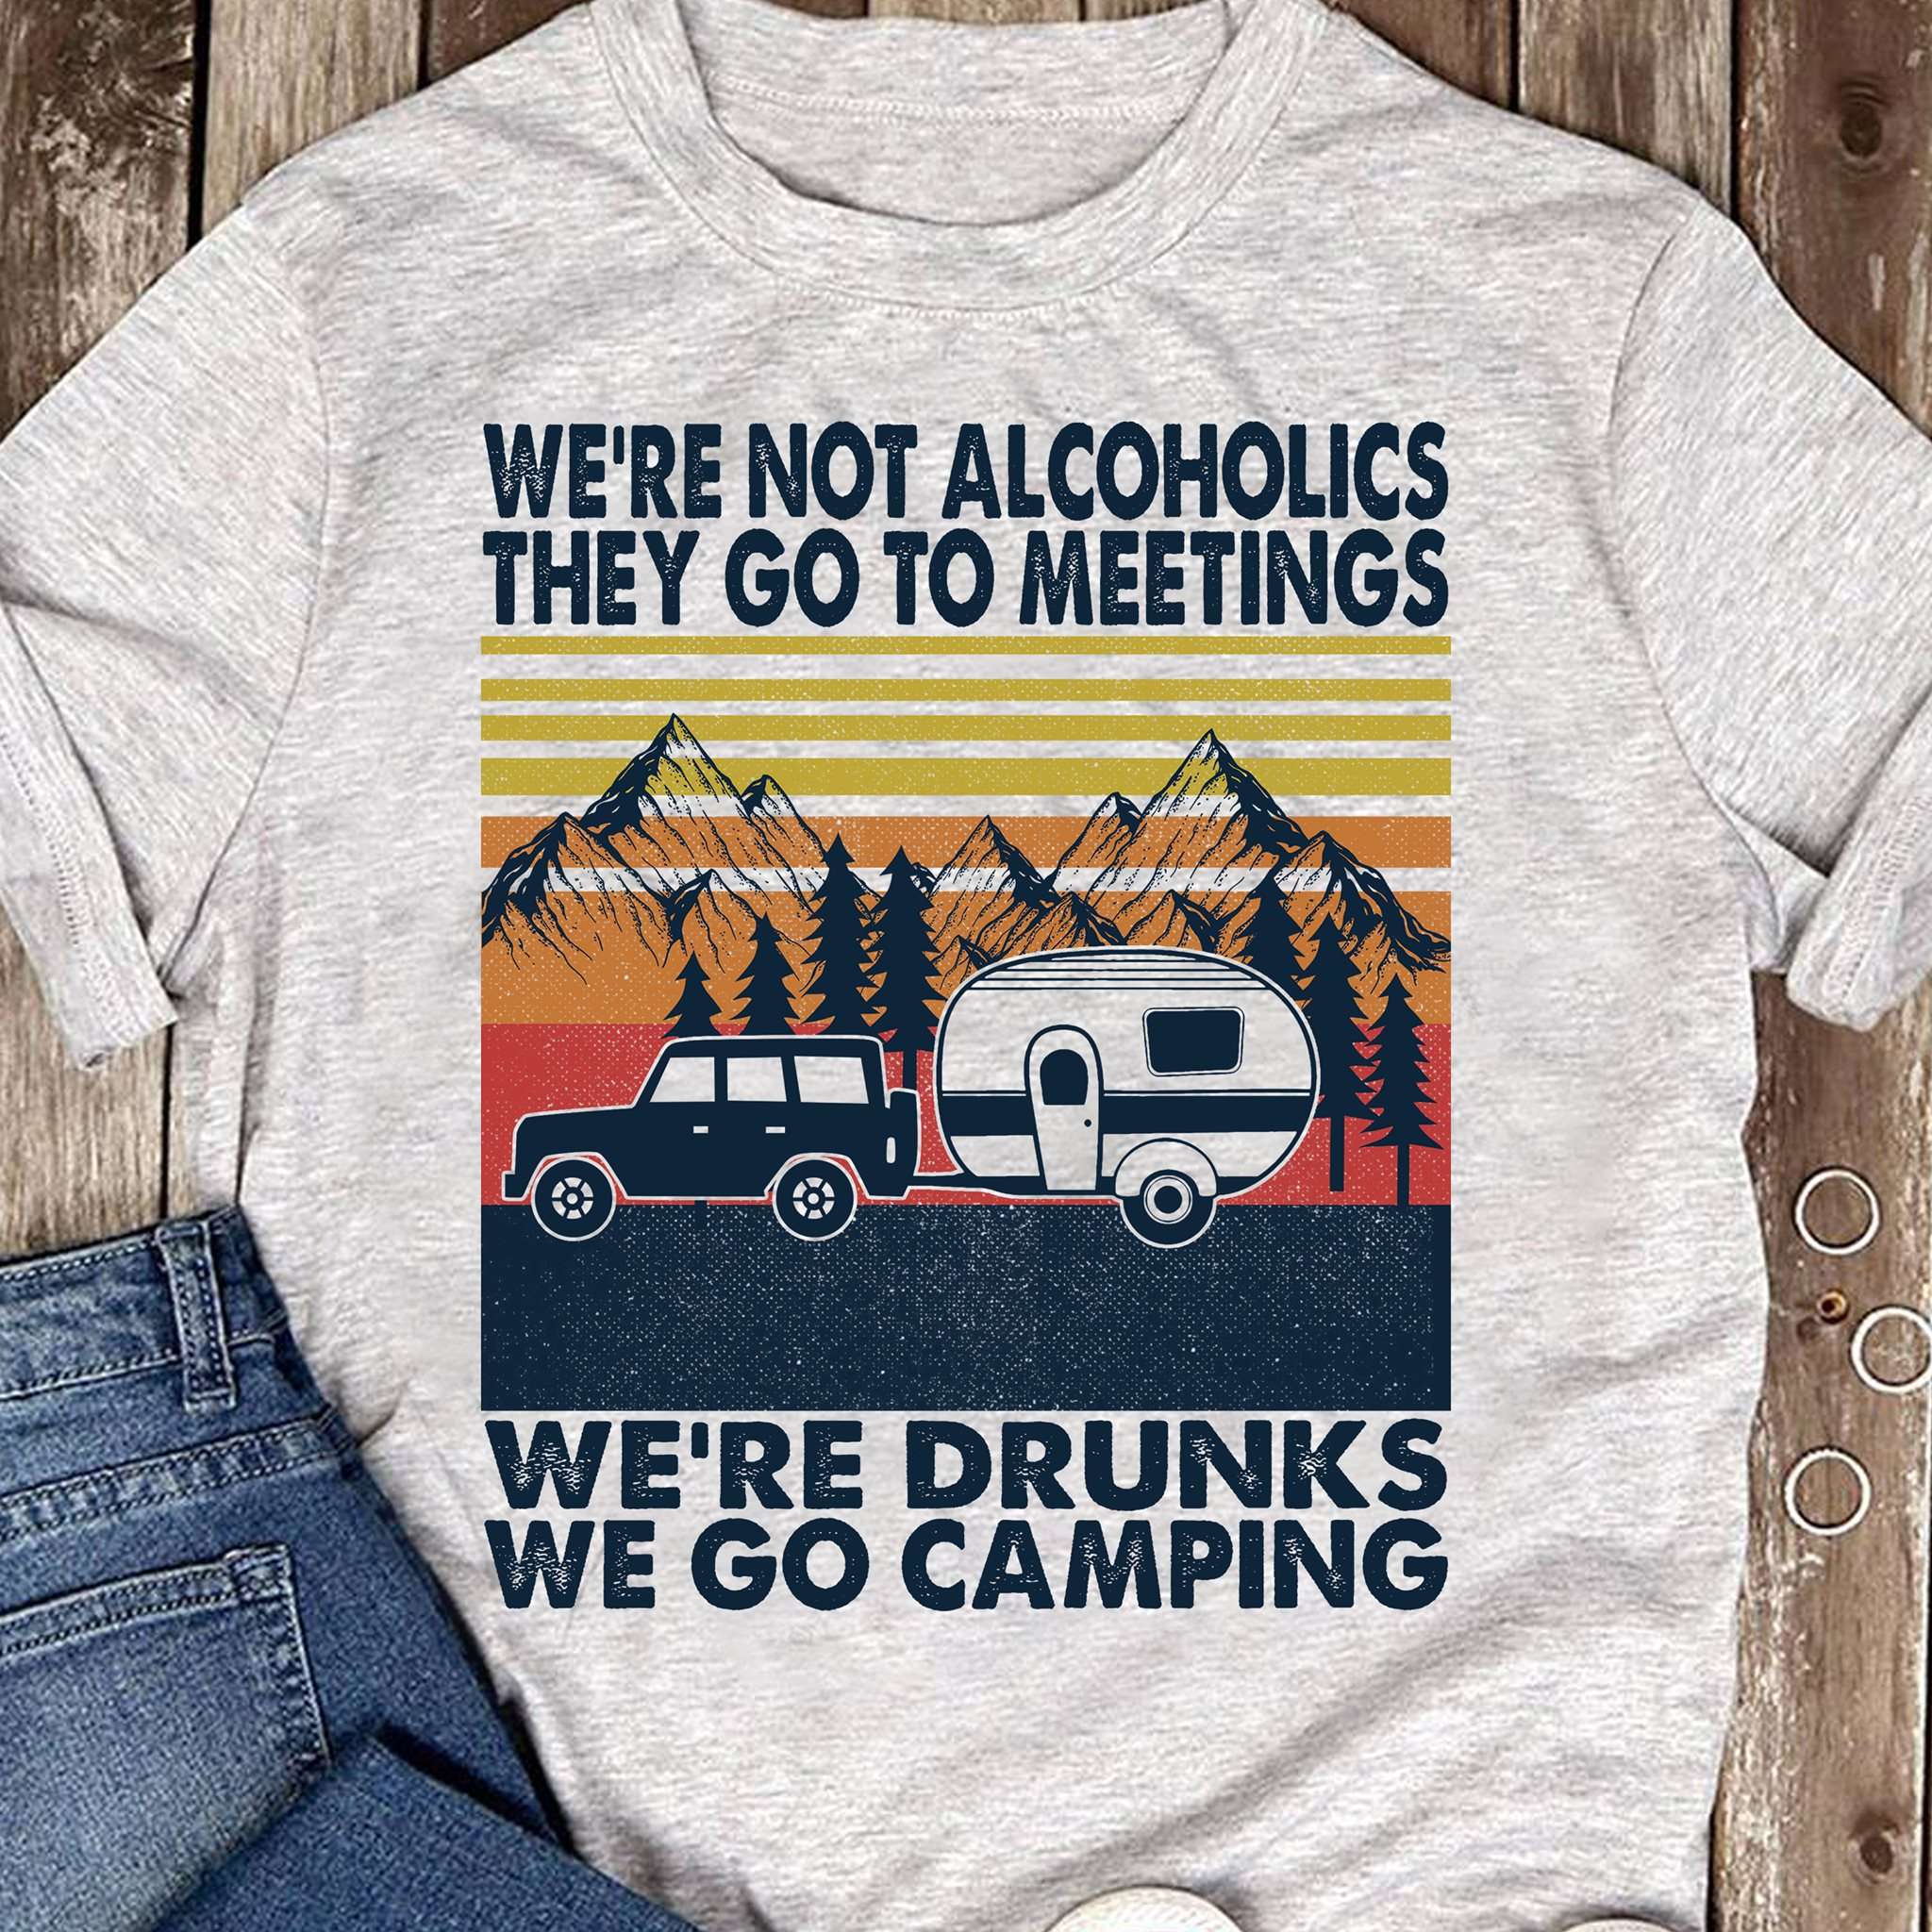 We're not alcoholics they go to meetings we're drunks we go camping - Camping and drinking